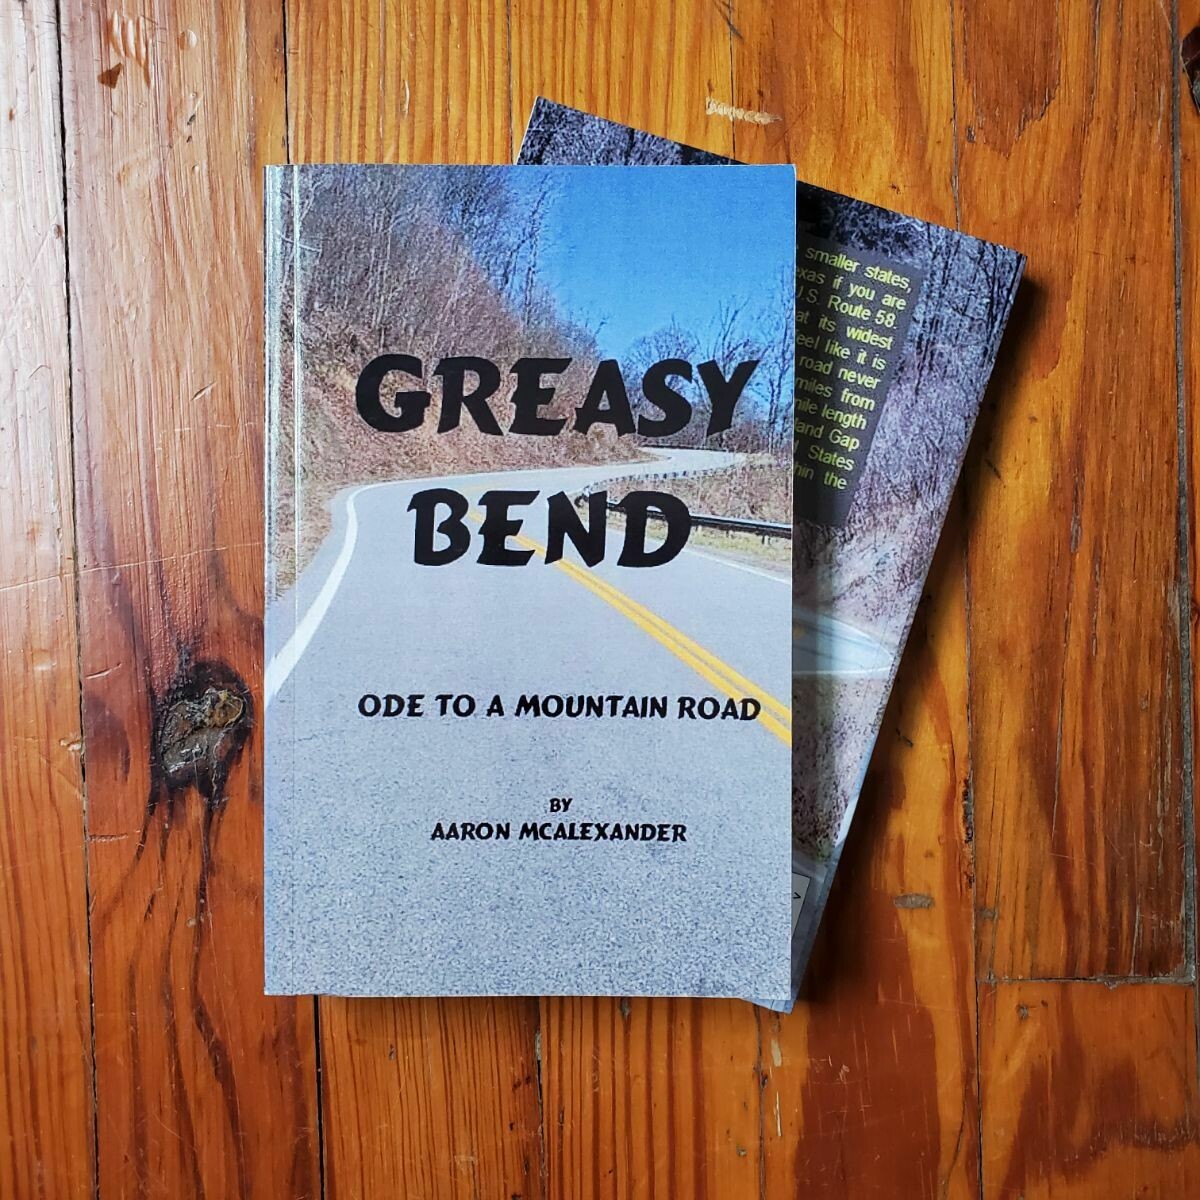 Greasy Bend: Ode to a Mountain Road by: Aaron McAlexander